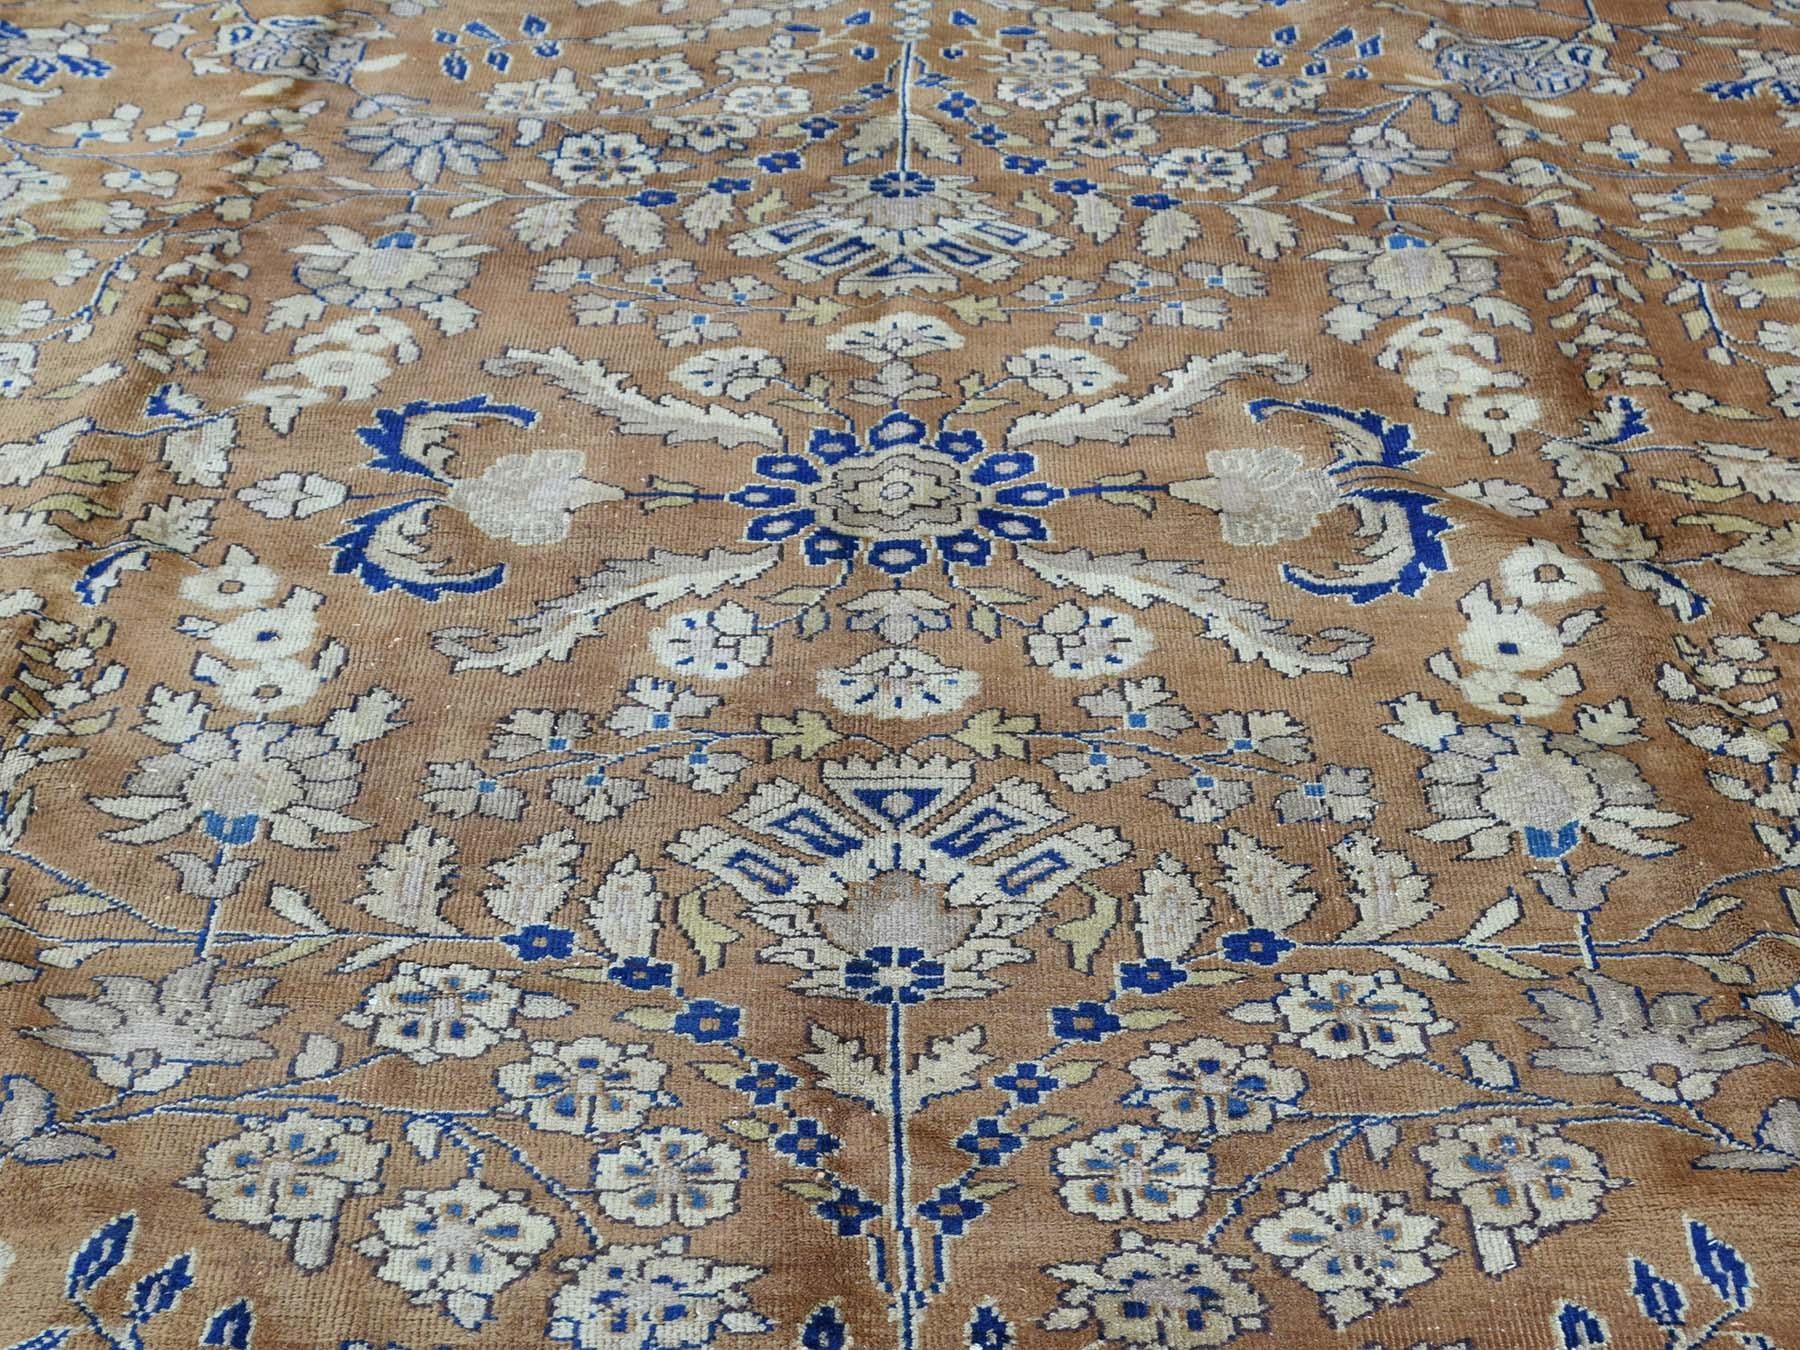 This is a genuine hand knotted Oriental rug. It is not hand tufted or machine made rug. Our entire inventory is made of either hand knotted or handwoven rugs.

Enhance your home with this magnificent hand knotted carpet. This handcrafted antique